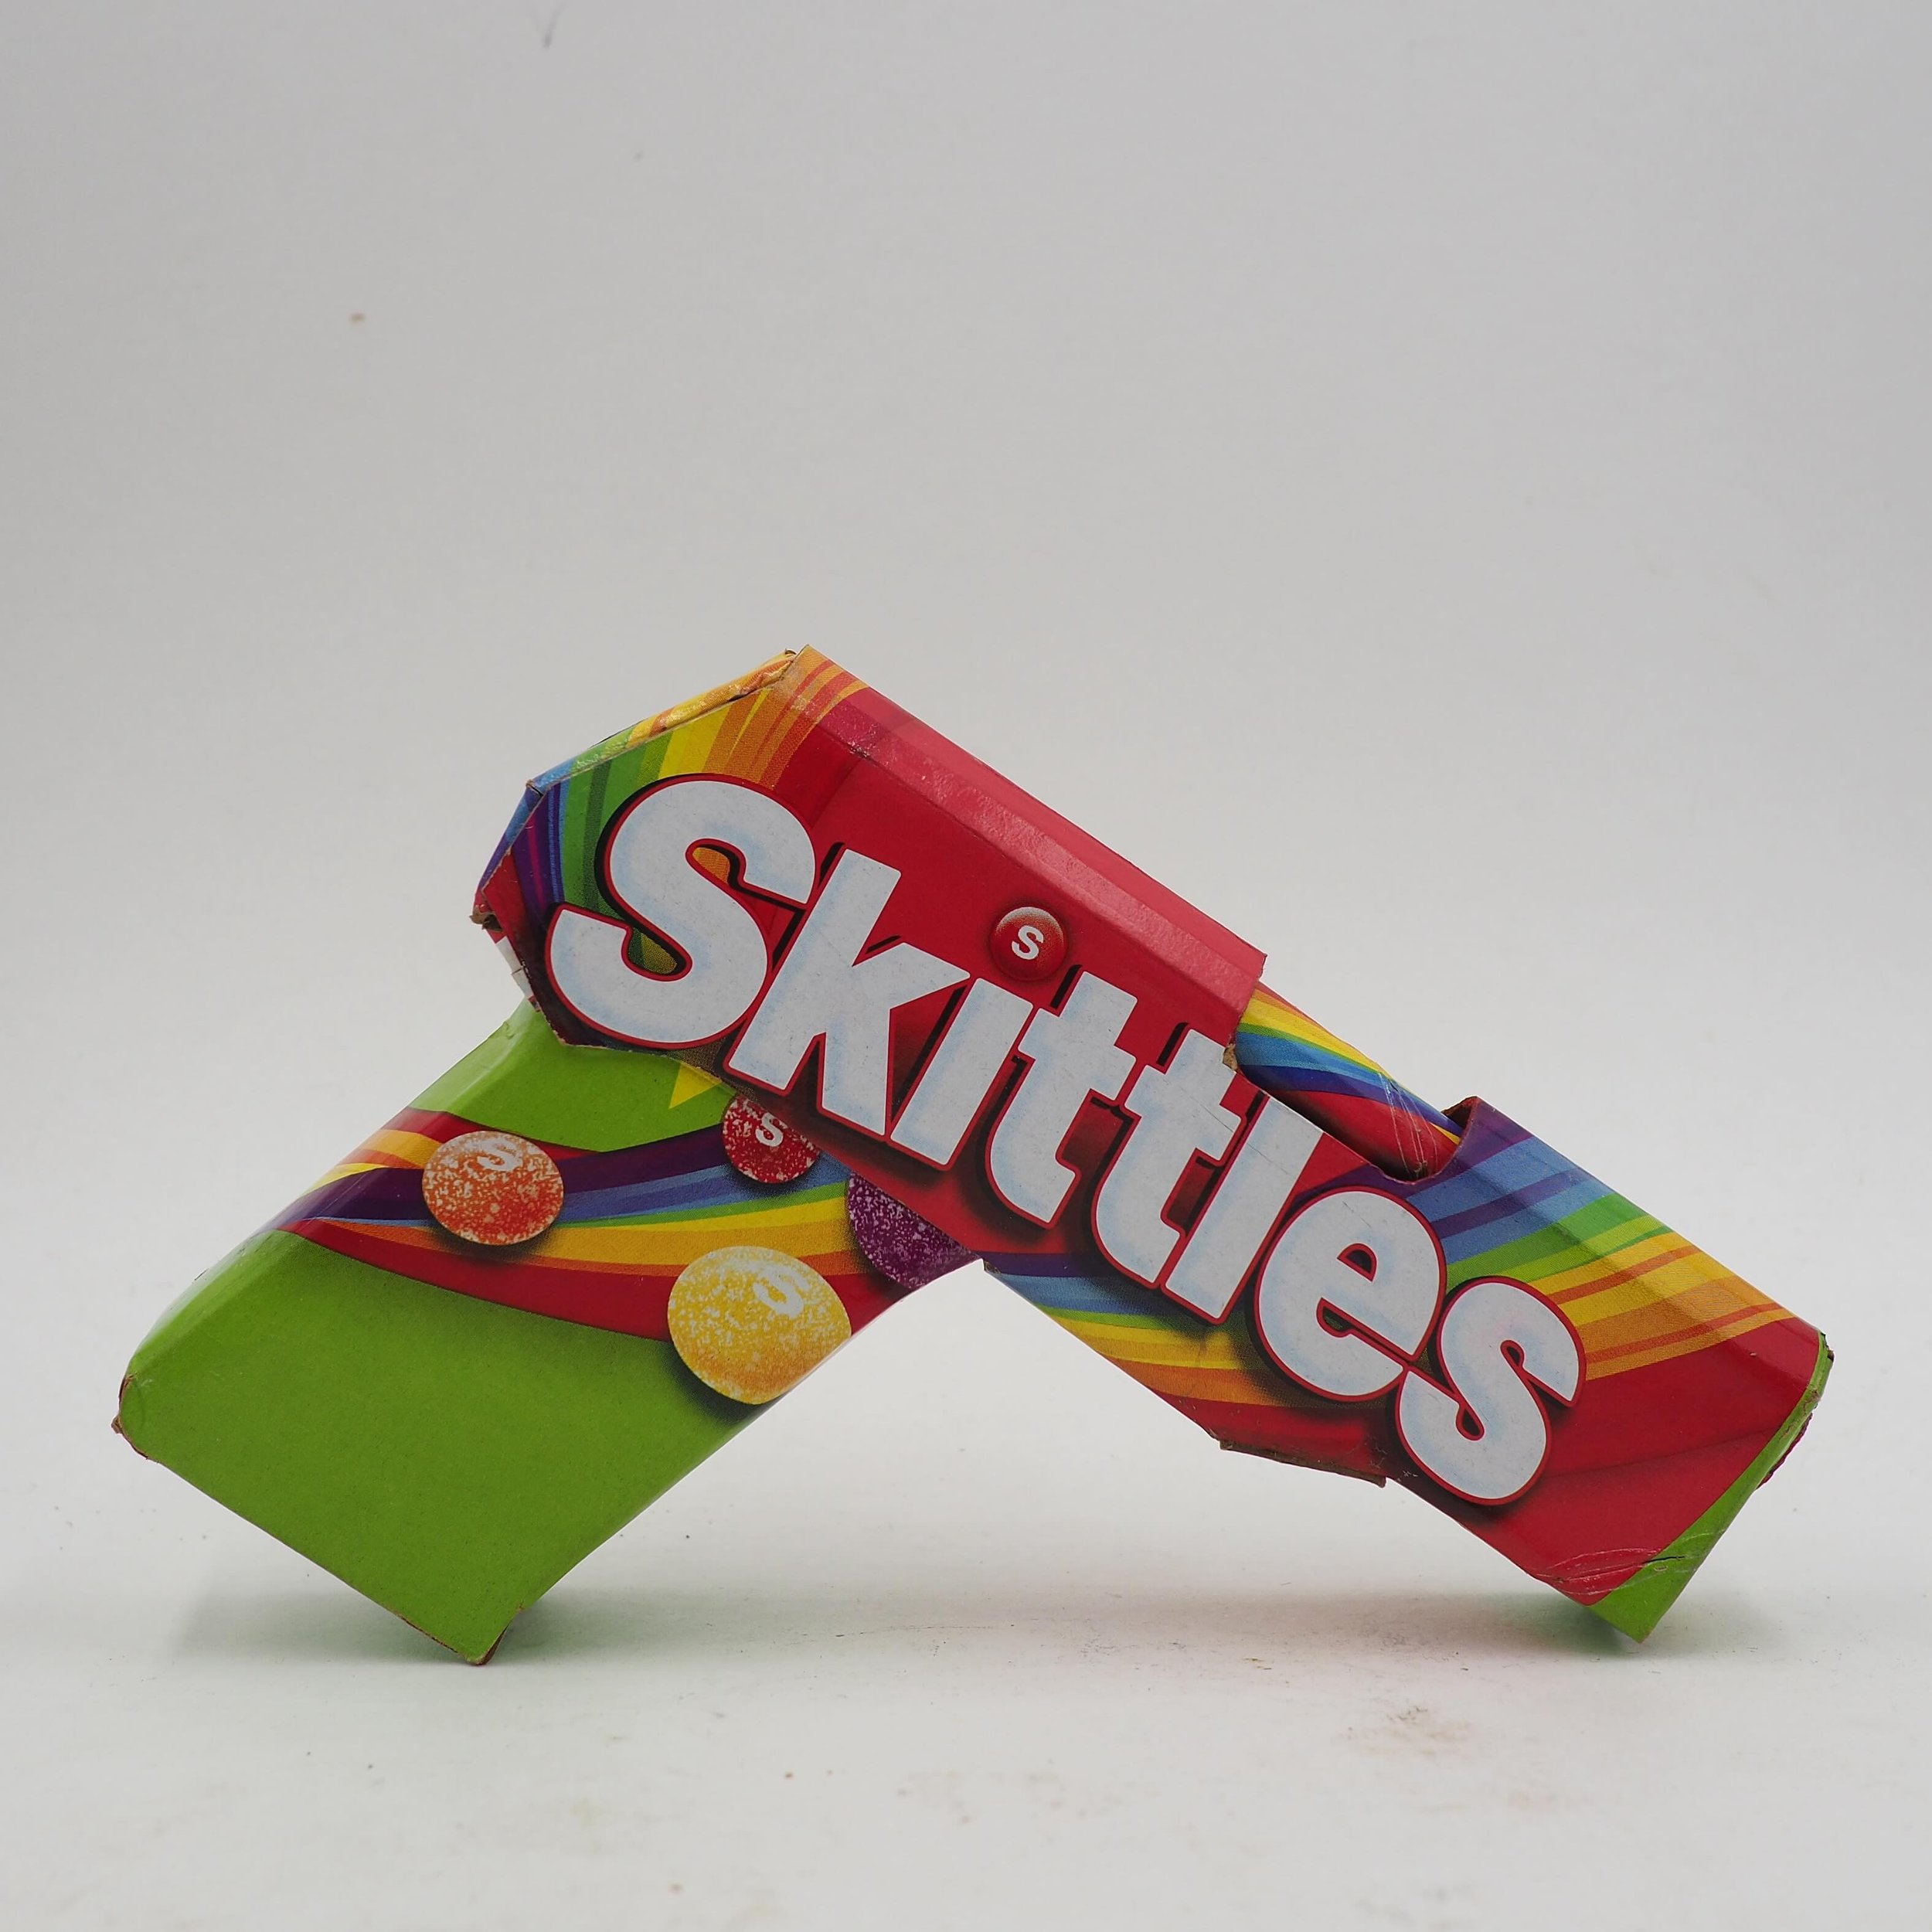 do you think more than 5,000 Skittles were eaten to generate the waste used to make this?